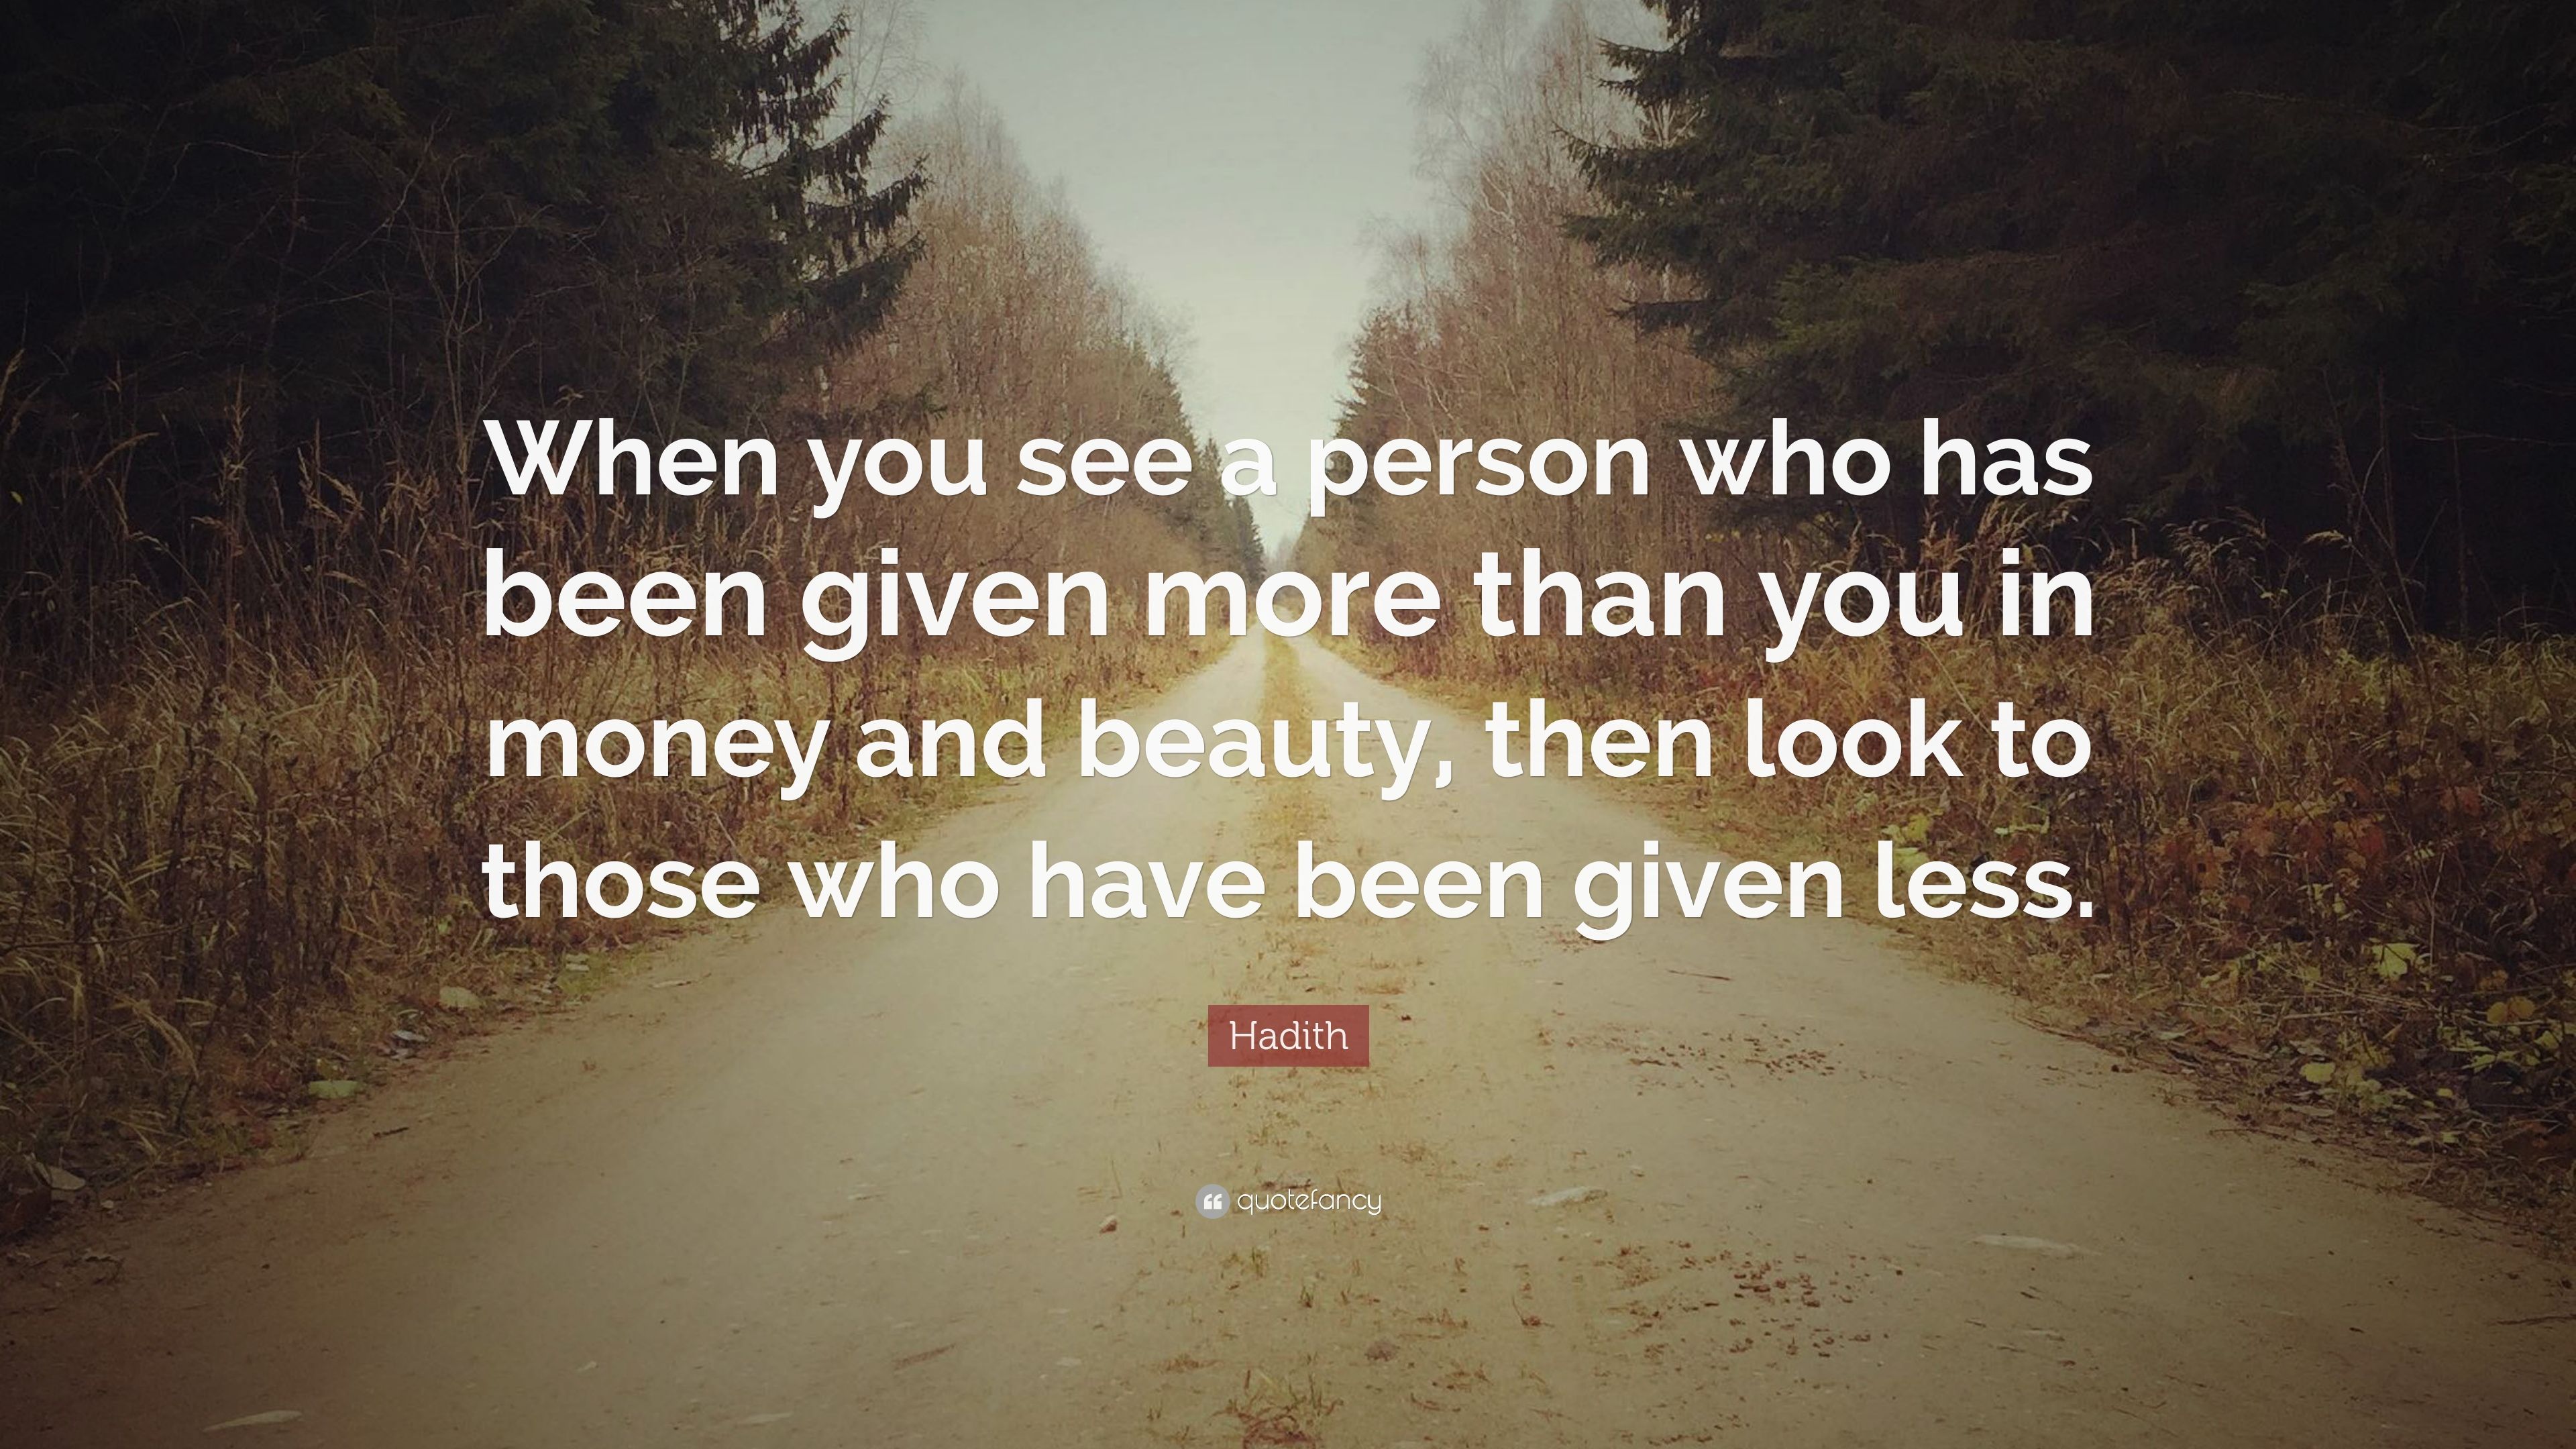 Hadith Quote: “When you see a person who has been given more than you in money and beauty, then look to those who have been given less.” (12 wallpaper)